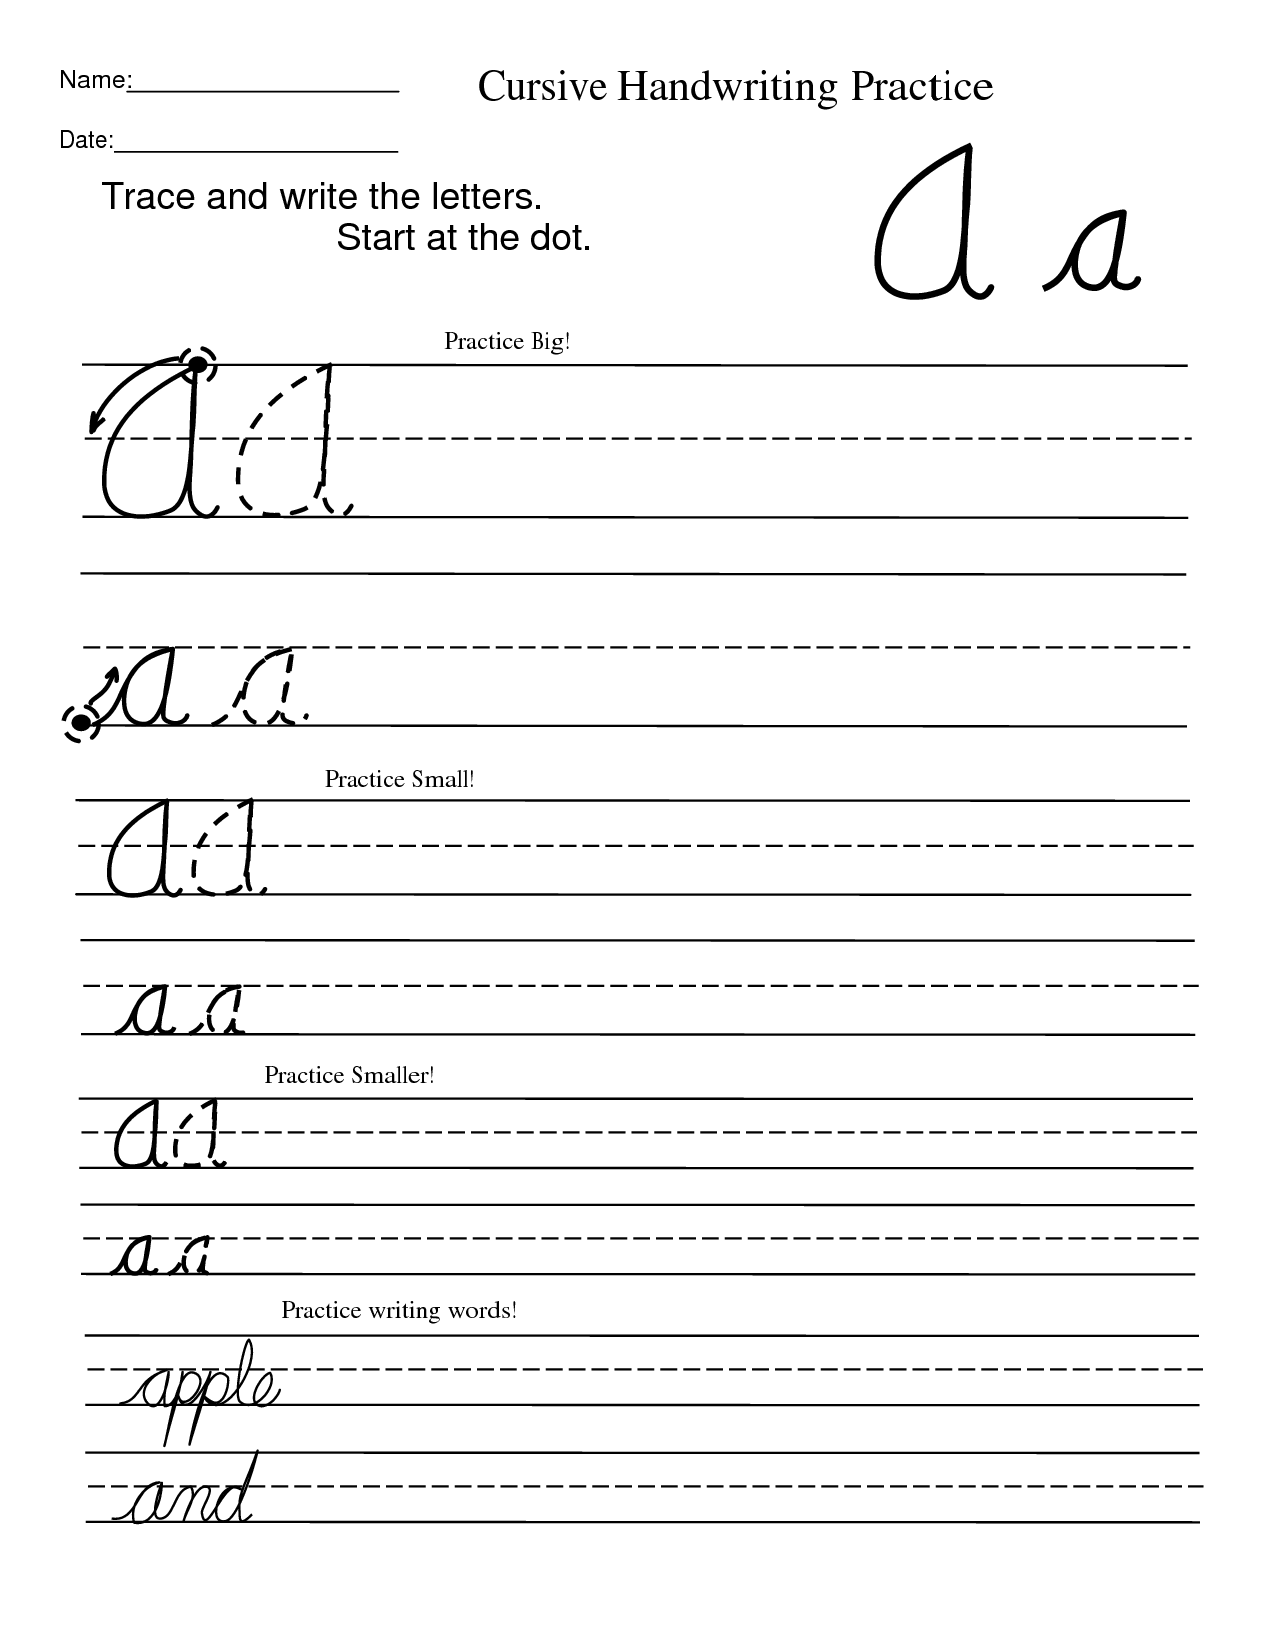 Search Results for “Cursive Handwriting Worksheet Template